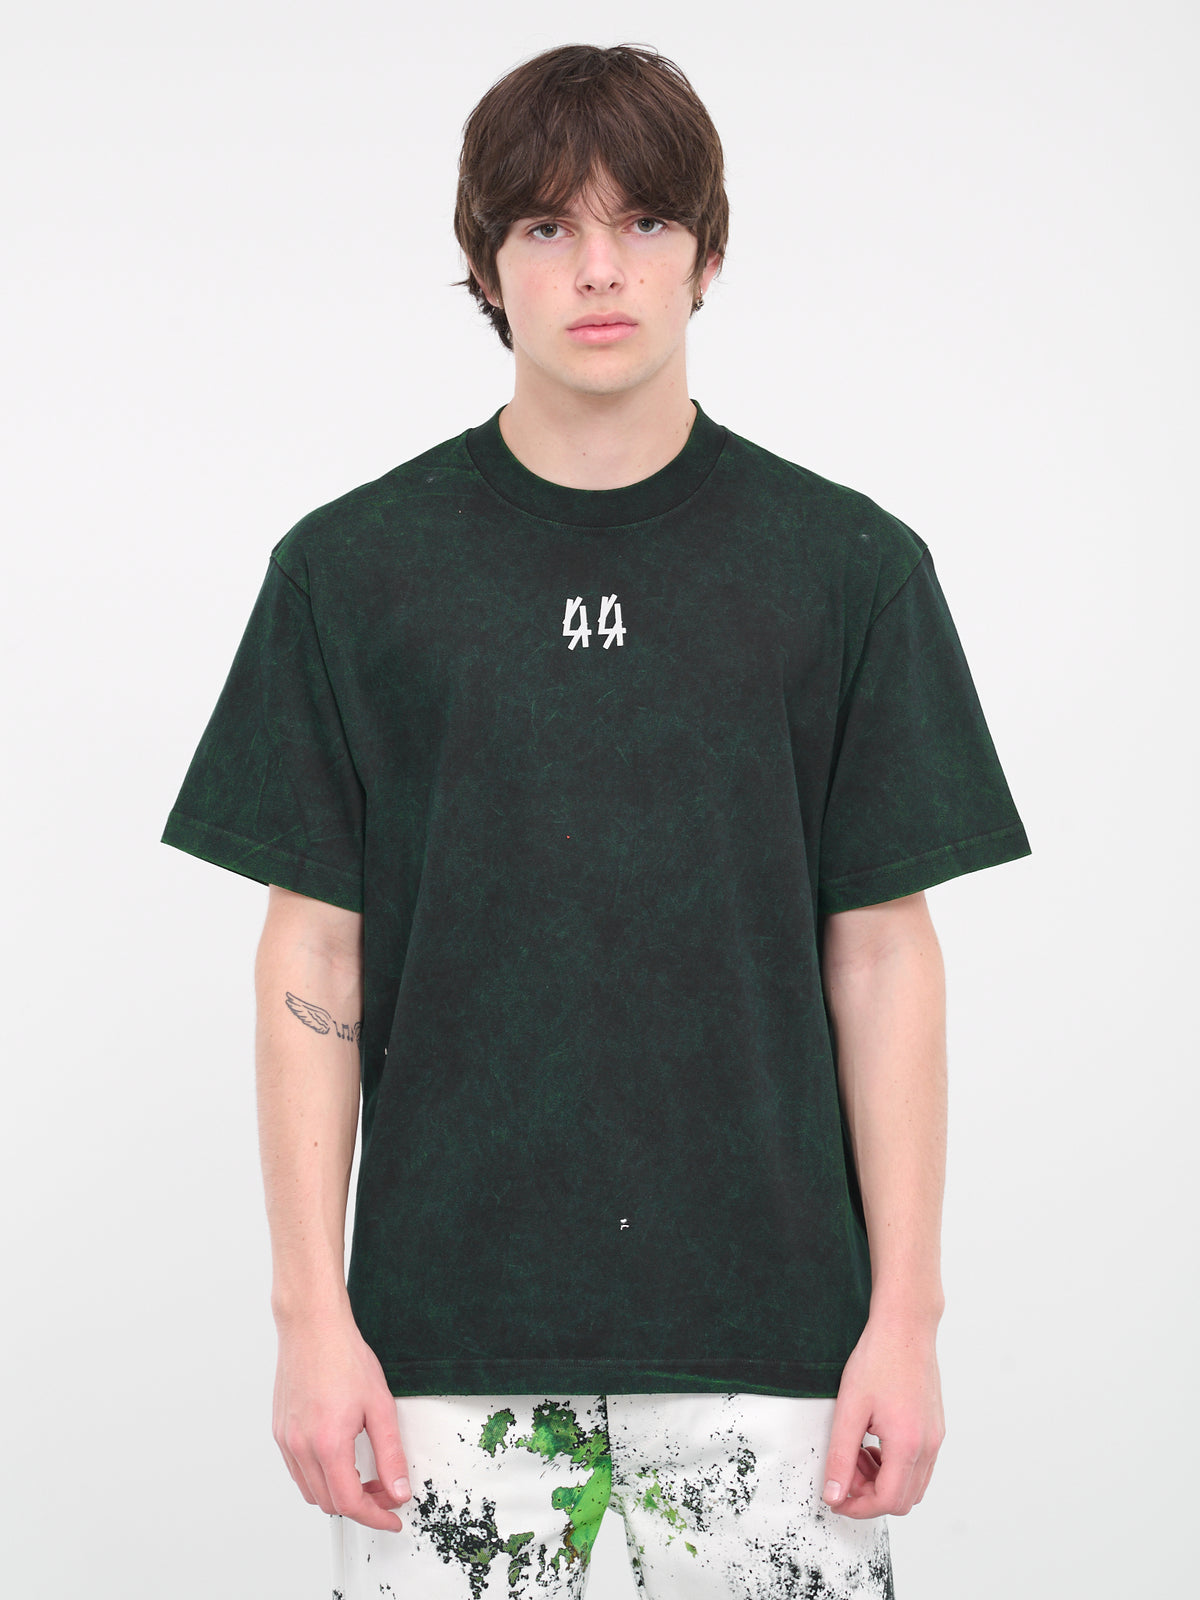 44 Label Group for Men SS24 | H.LORENZO - Los Angeles